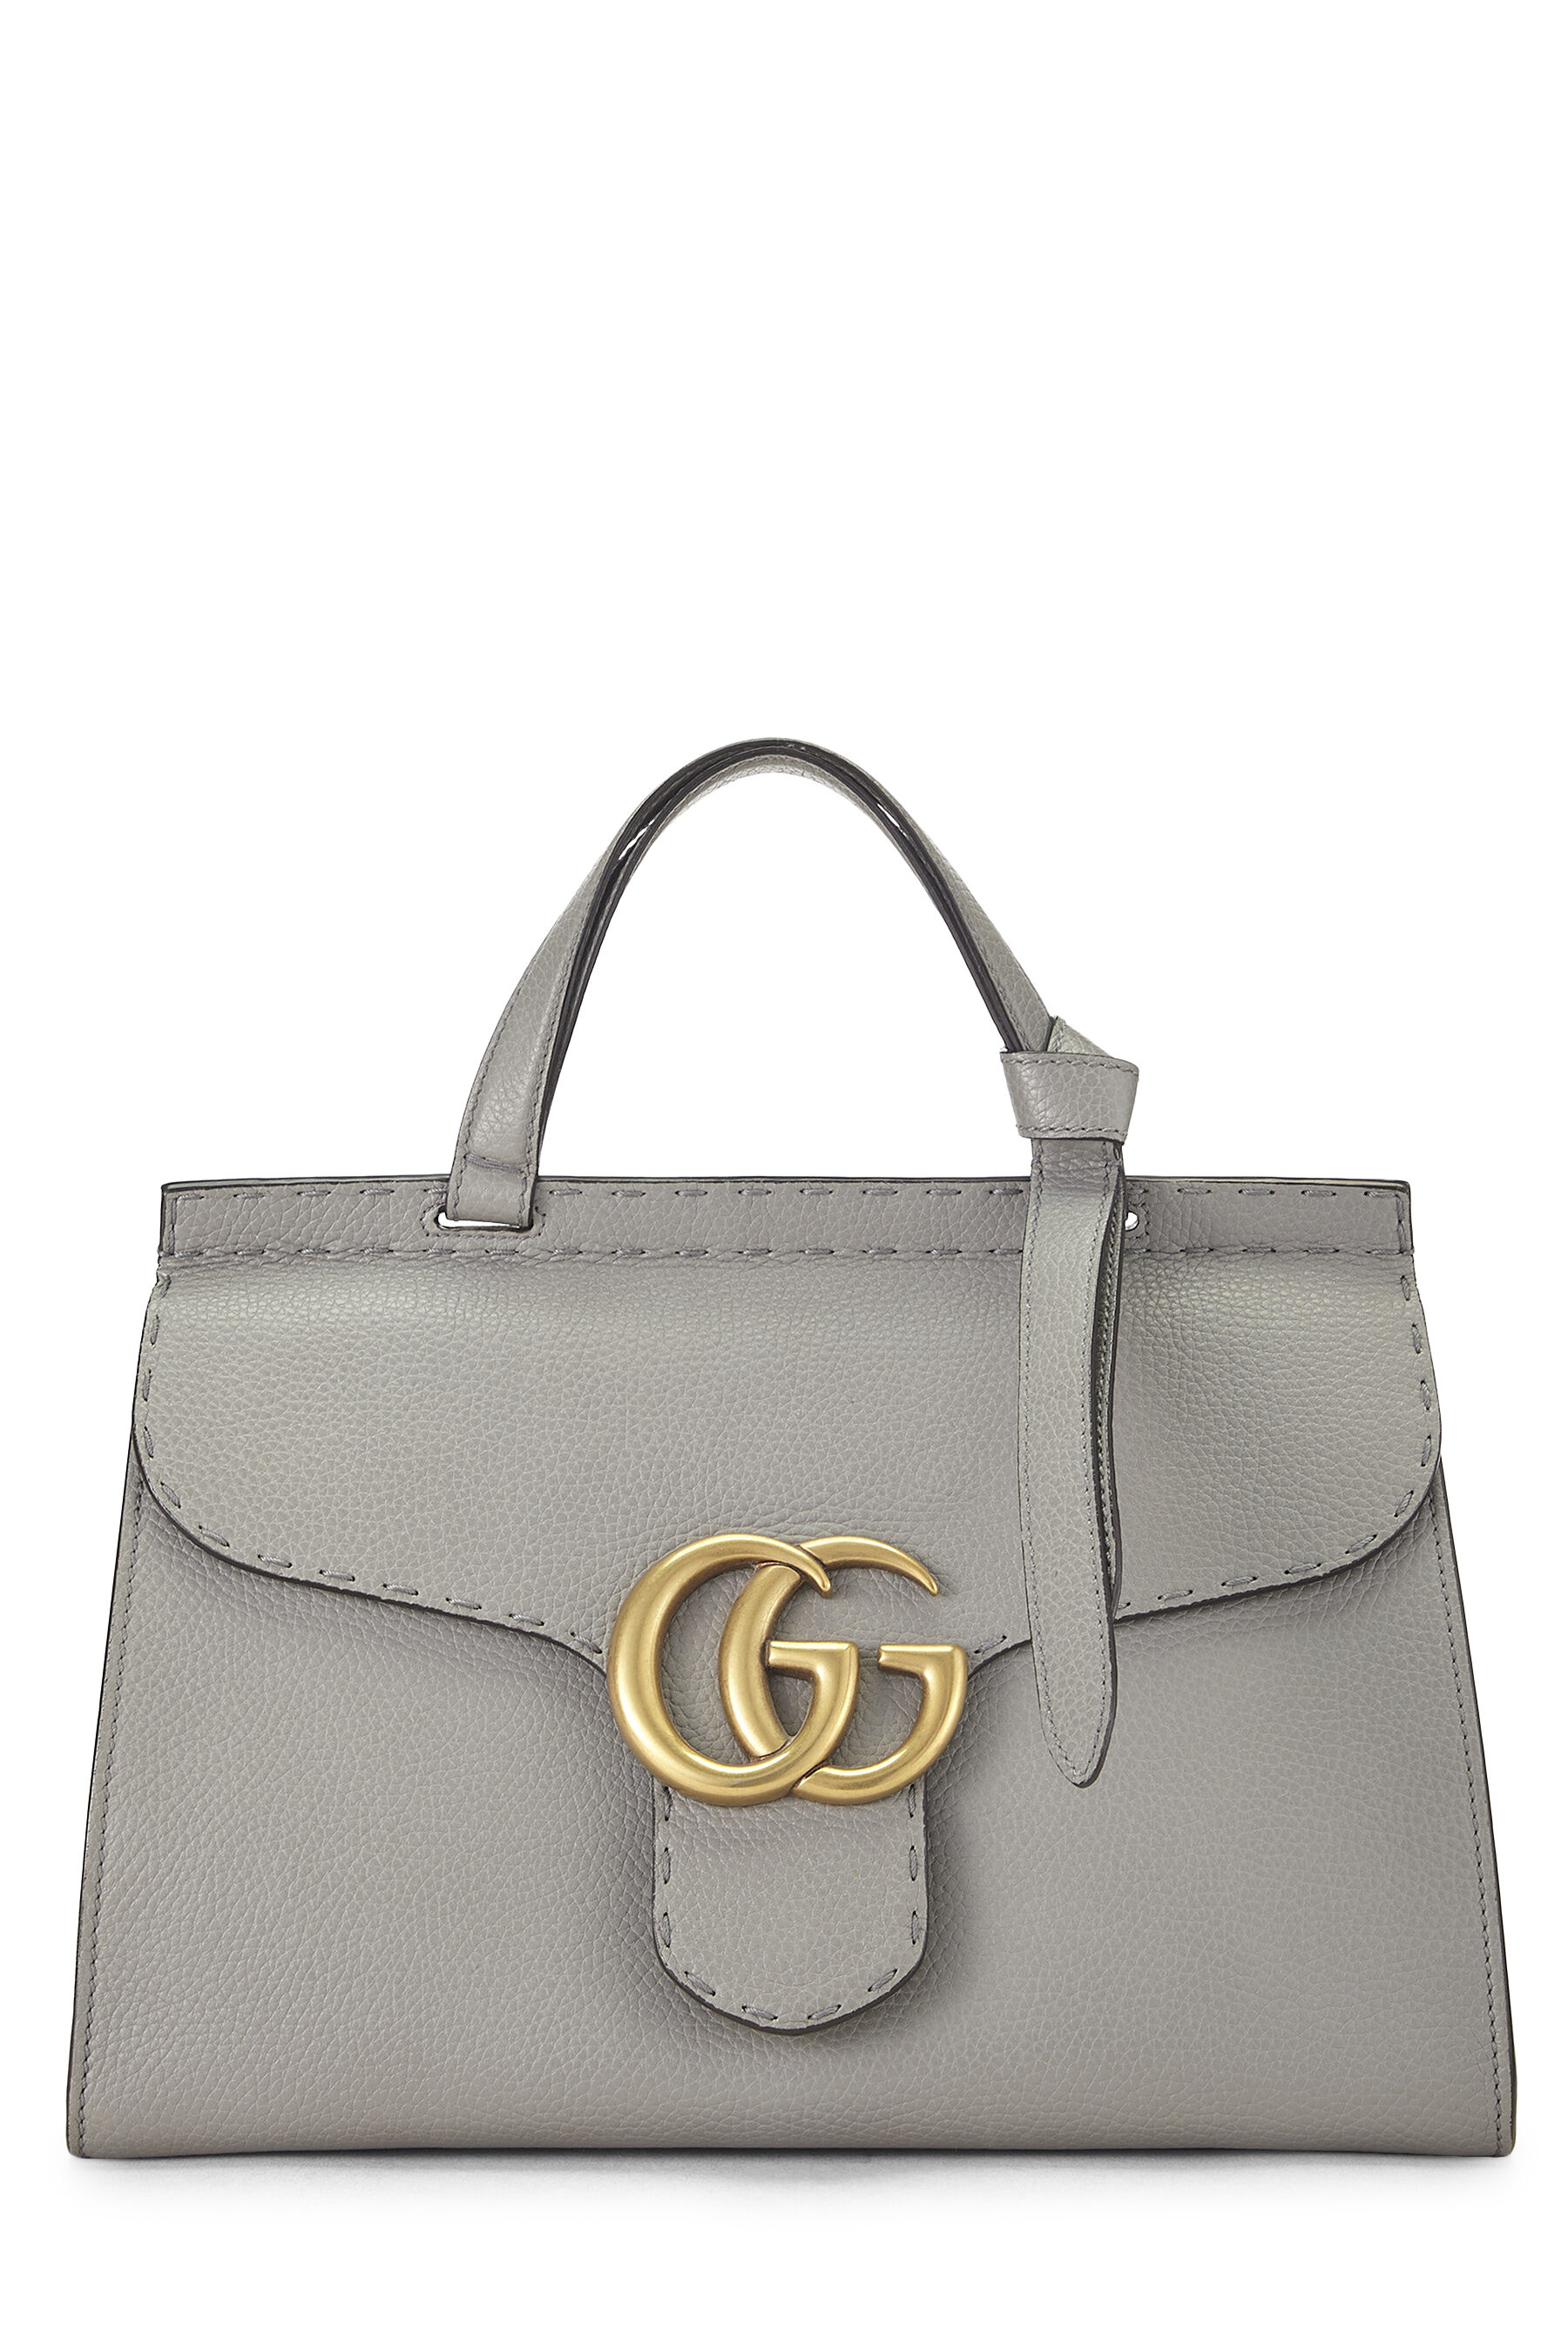 Grey Leather GG Marmont Top Handle Flap Bag